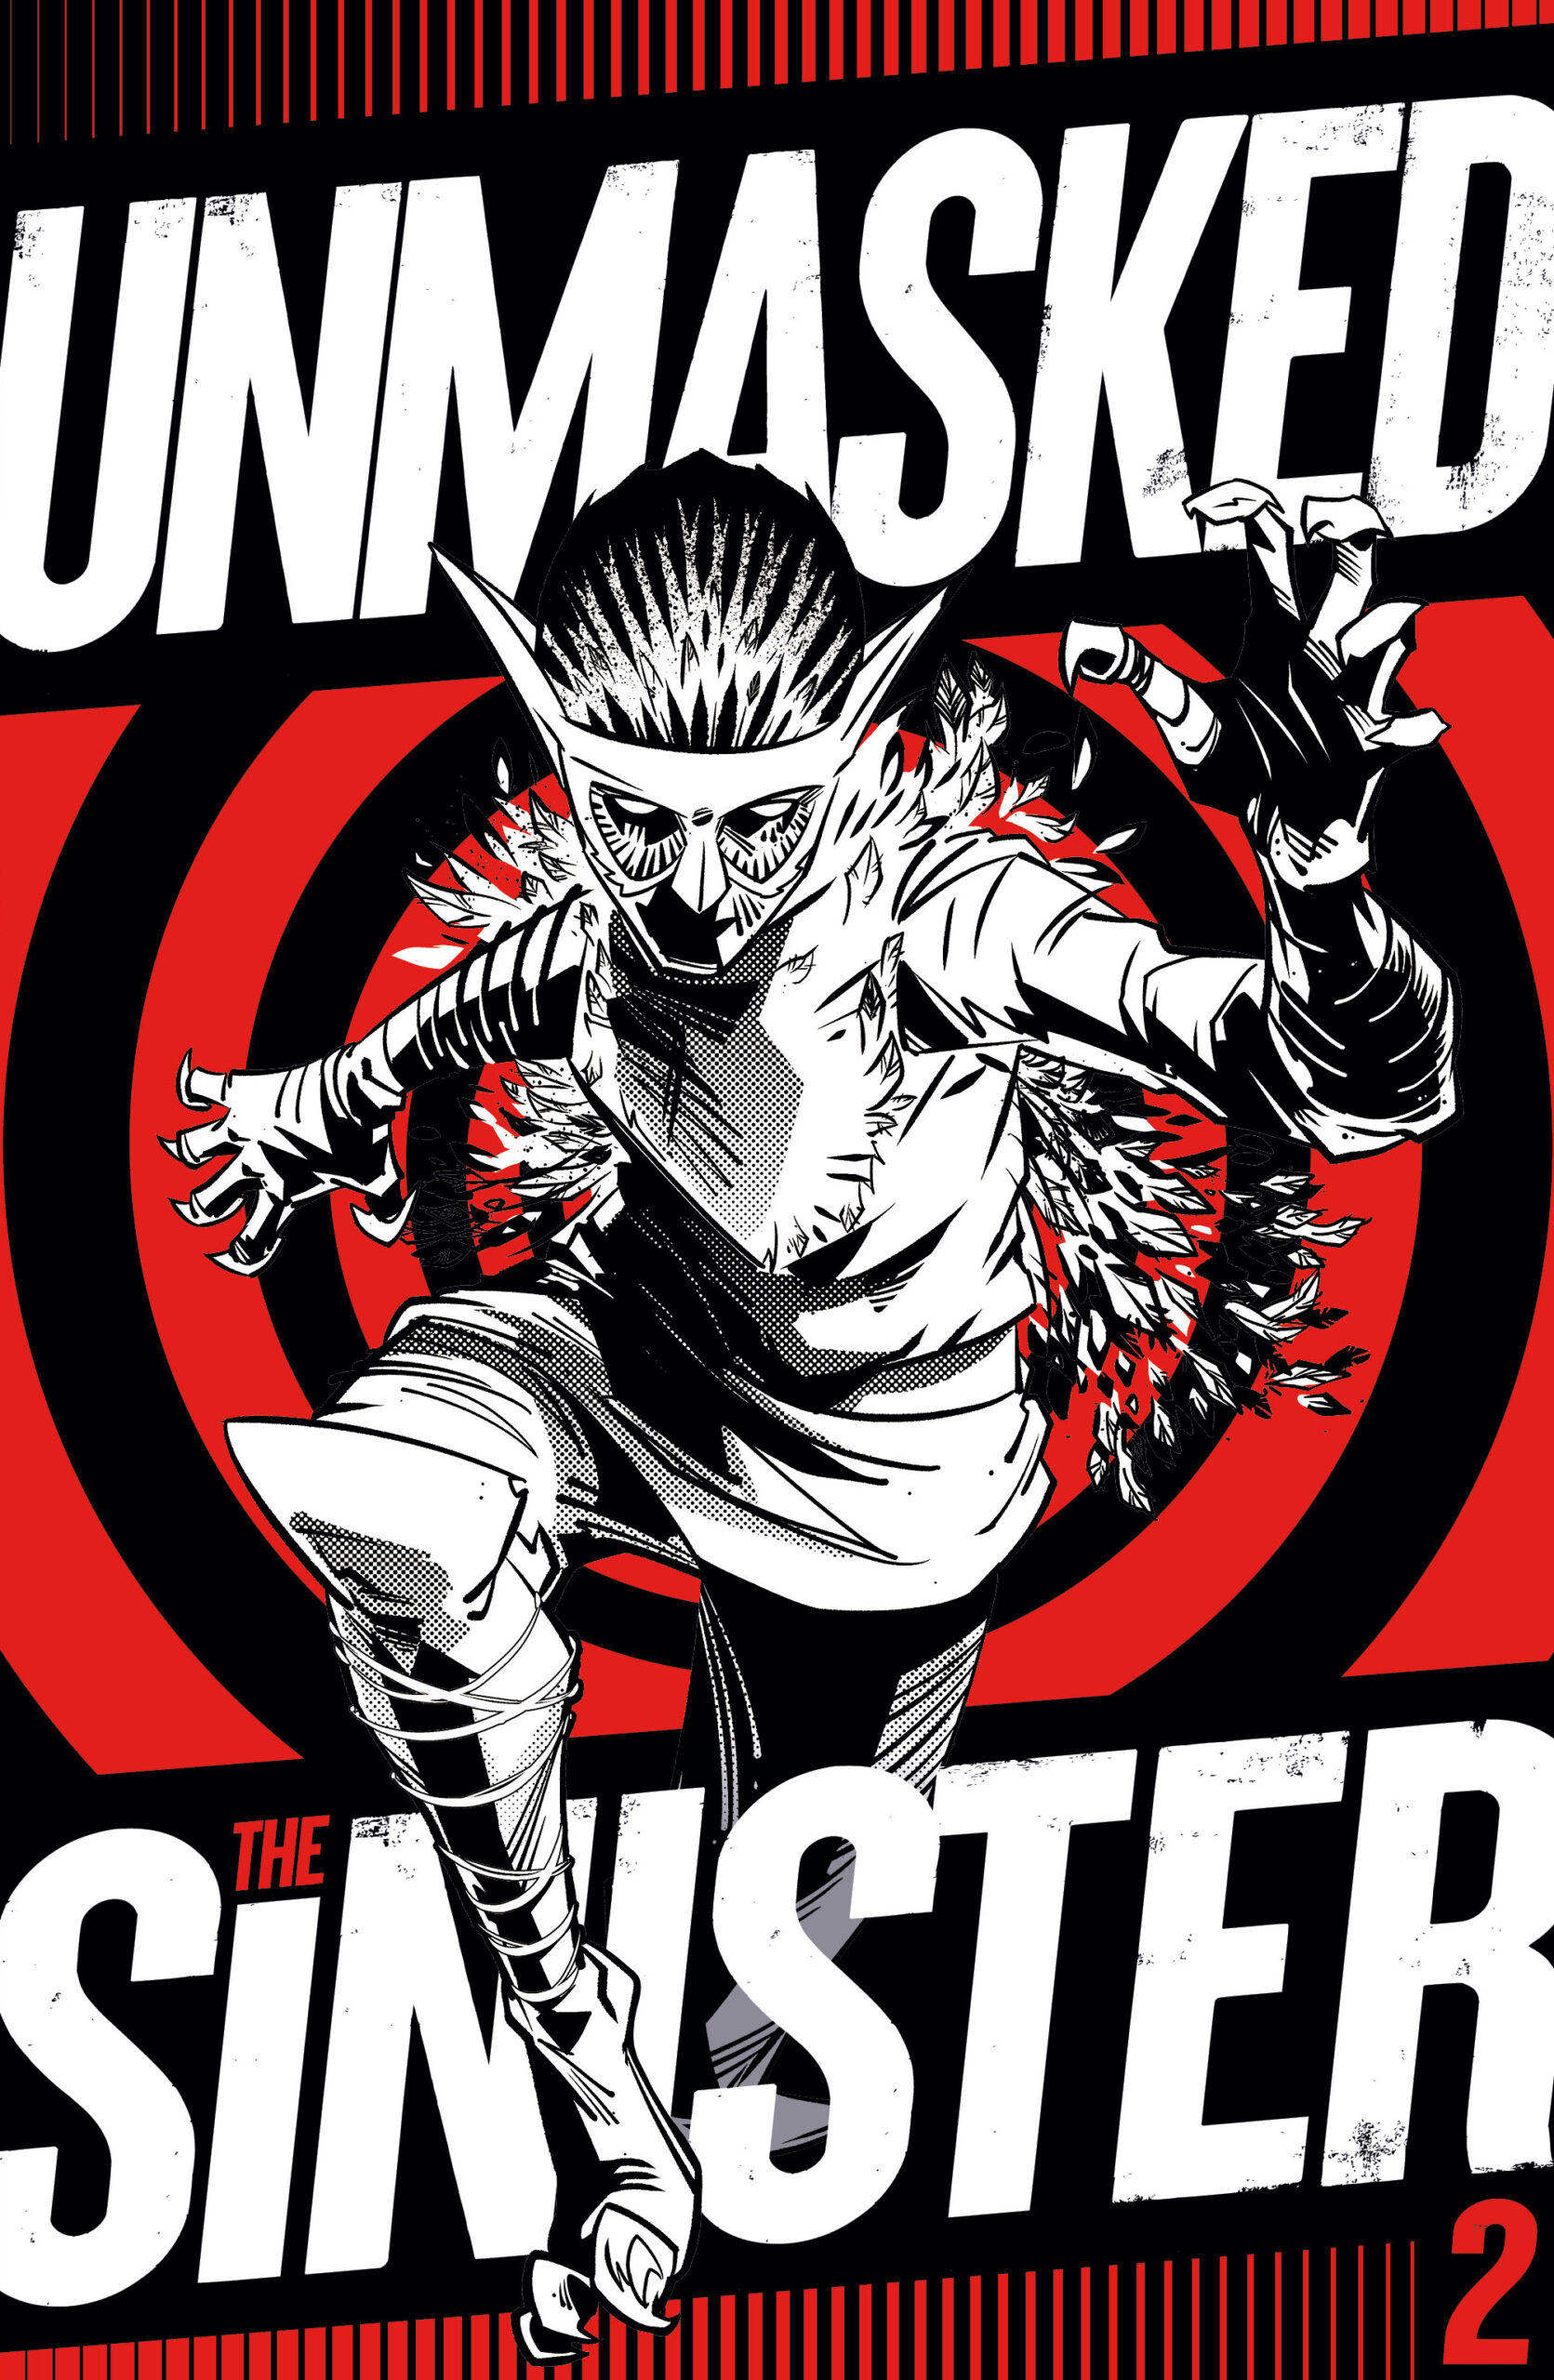 Unmasked: The Sinister #2 cover art by Trev Wood with design by Wolfgang Bylsma